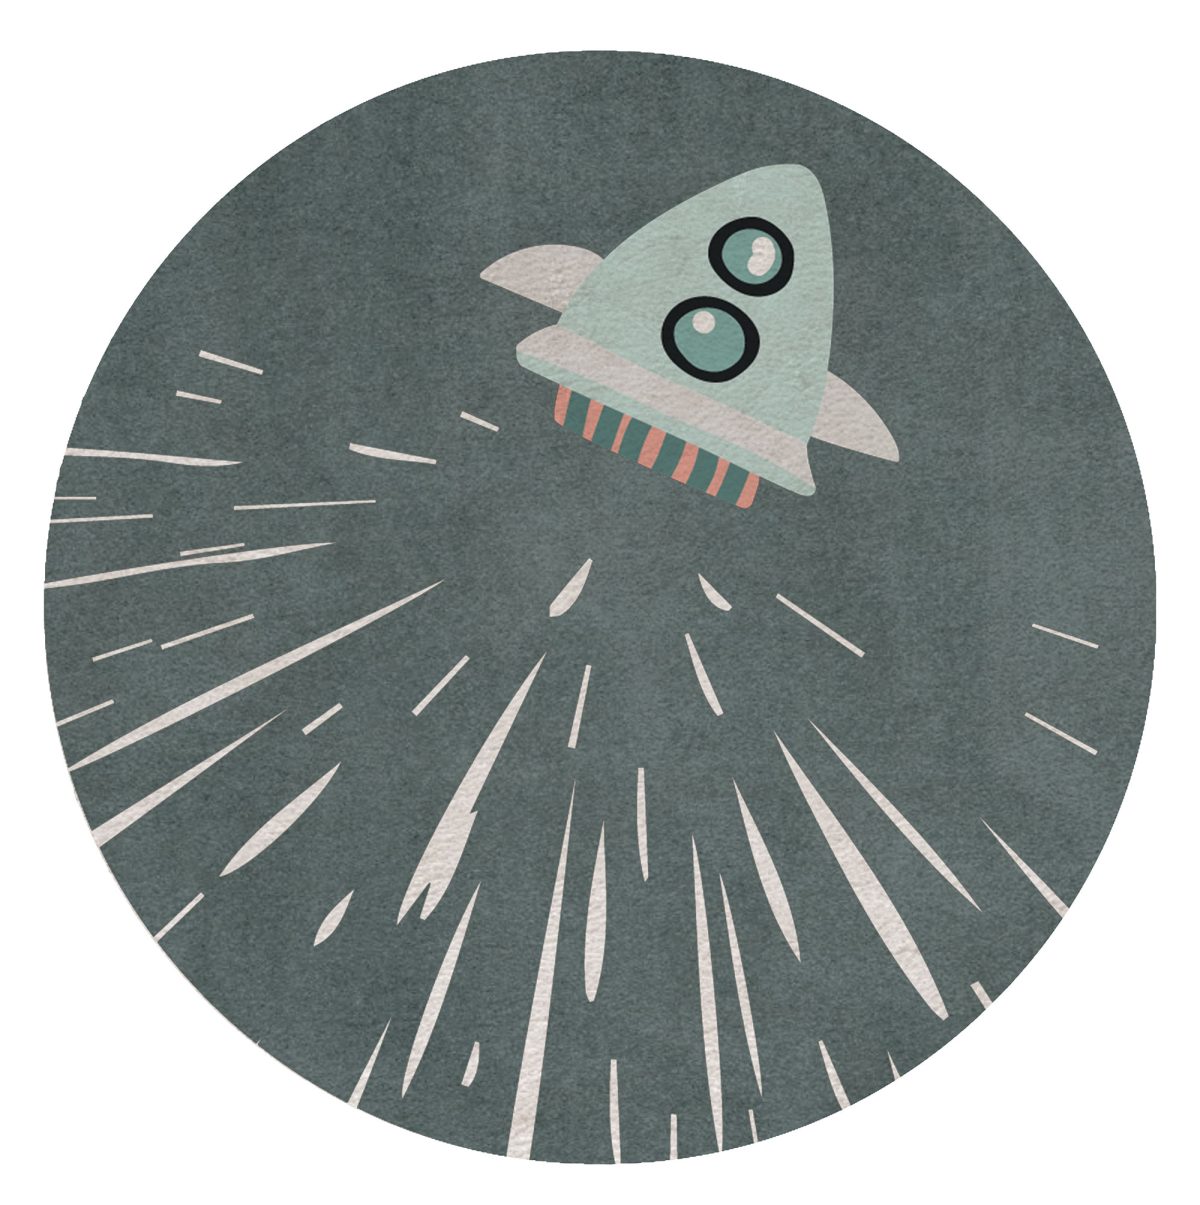 Embark into a space mission with the Thunder Rocket Round Rug!